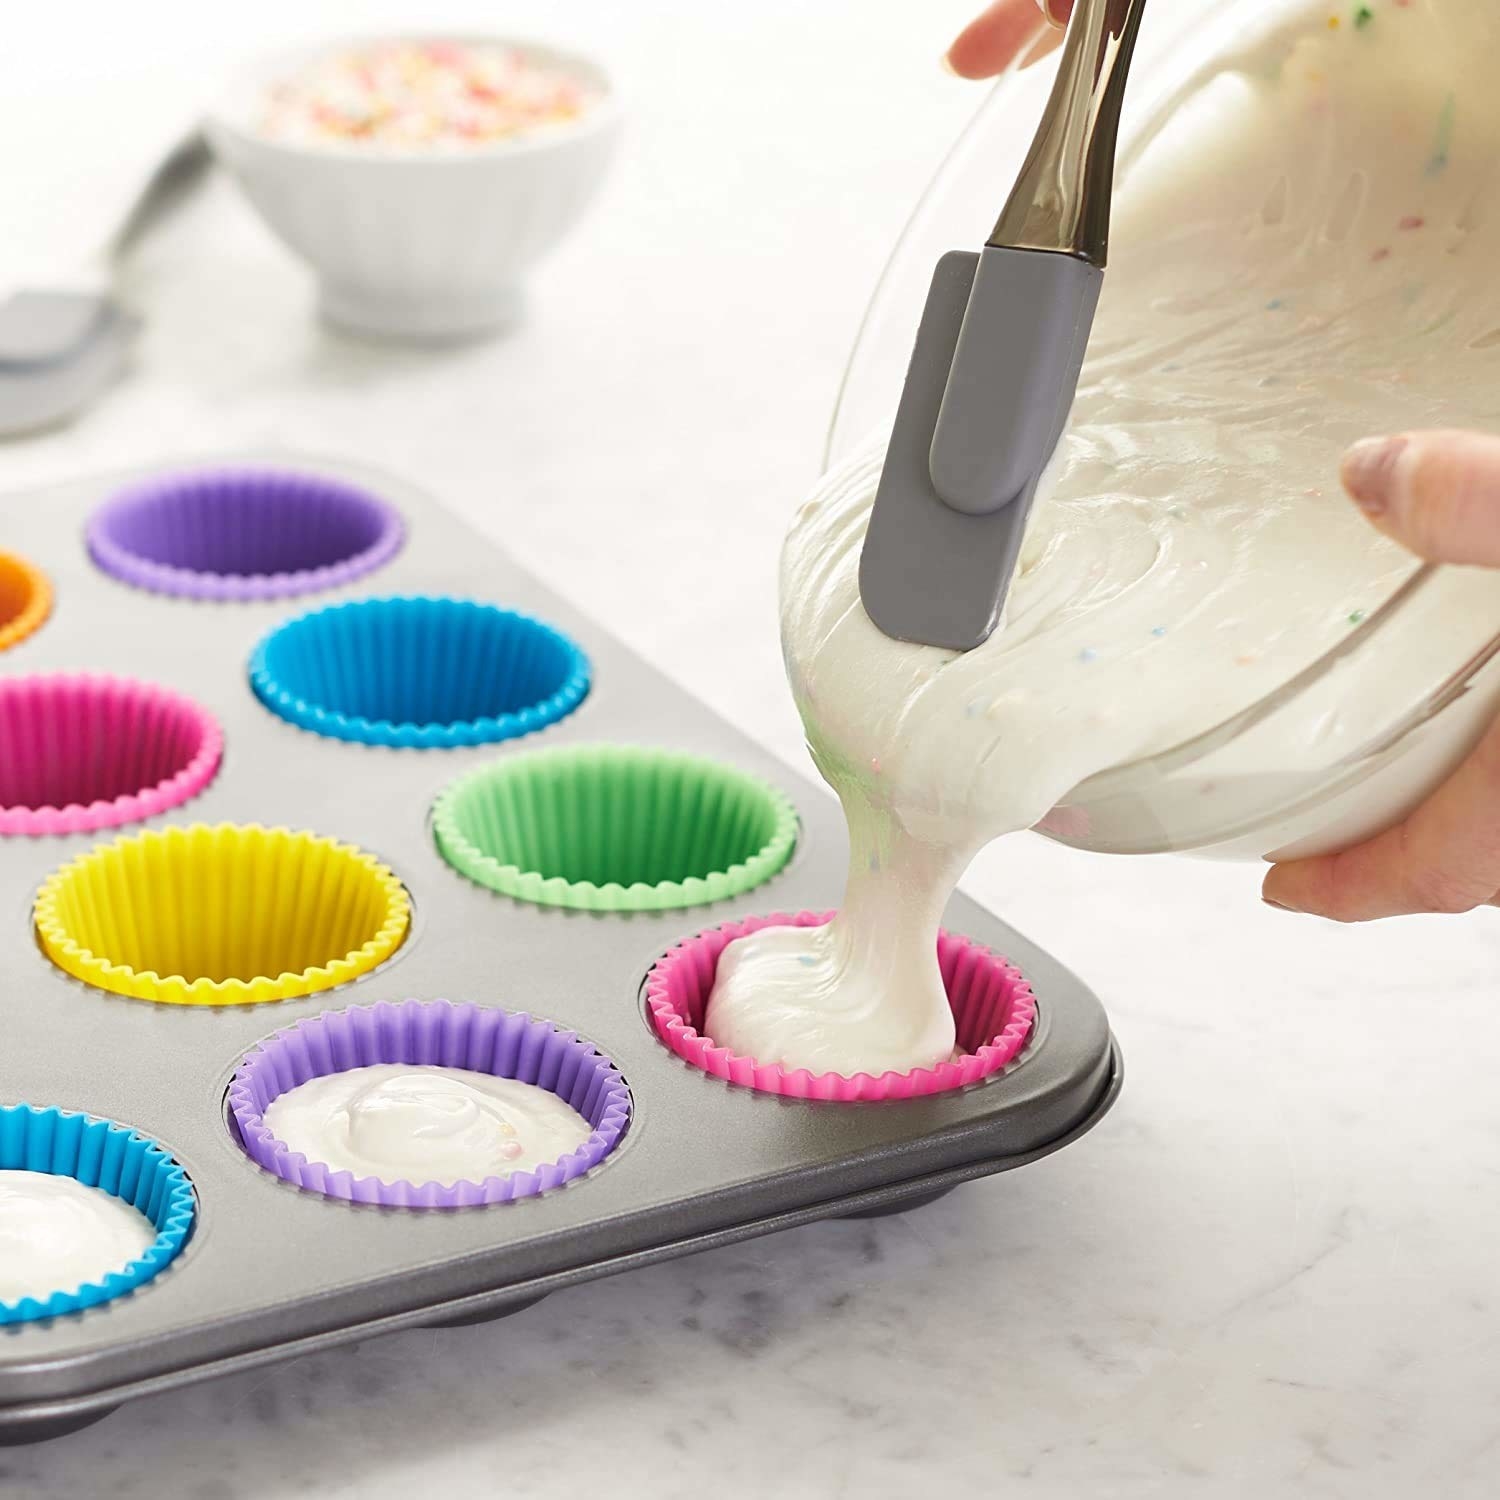 Muffin batter being poured into the muffin cups.